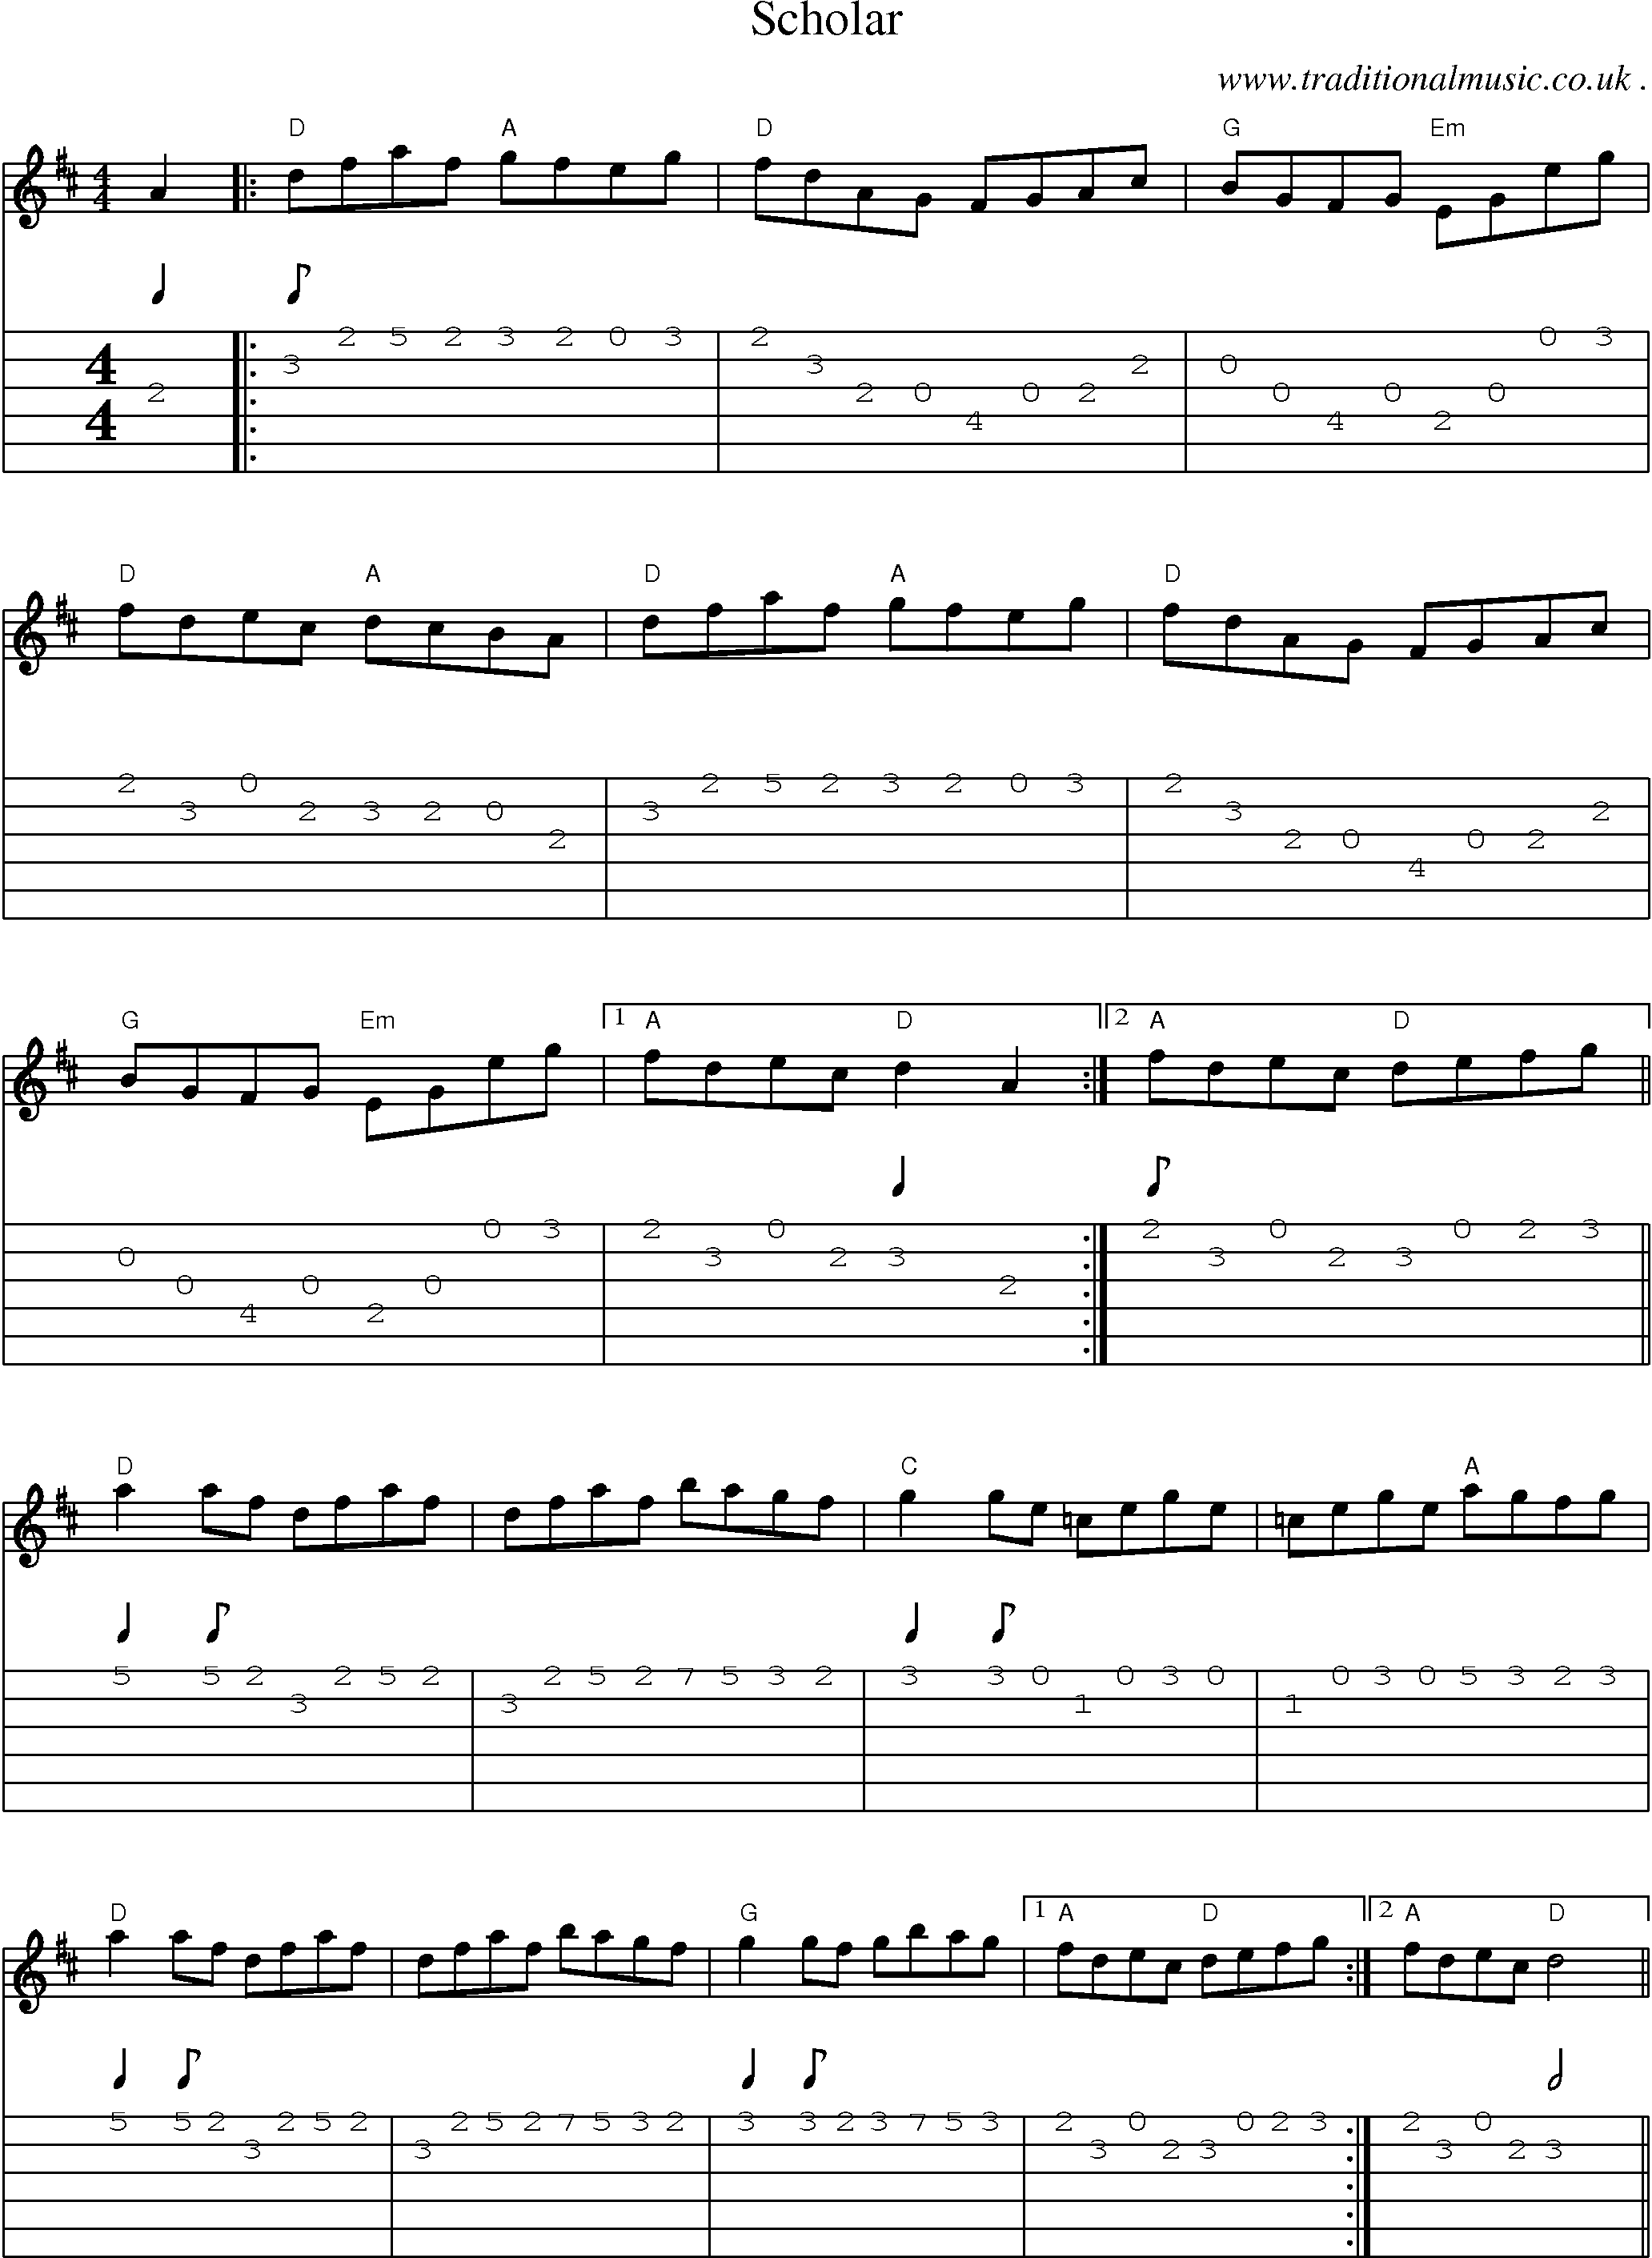 Music Score and Guitar Tabs for Scholar